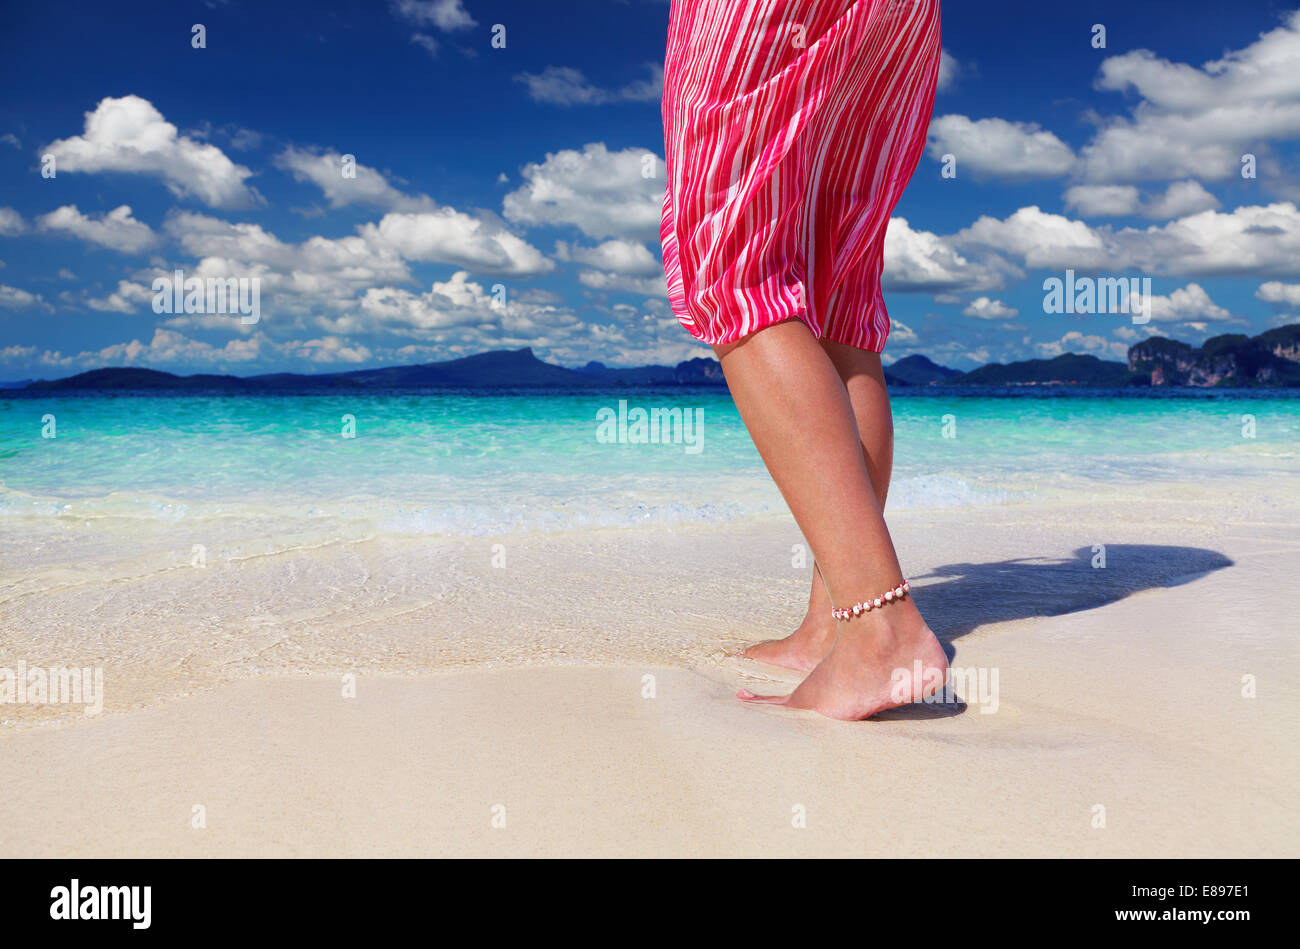 Tanned woman on the tropical beach, Andaman Sea, Thailand Stock Photo